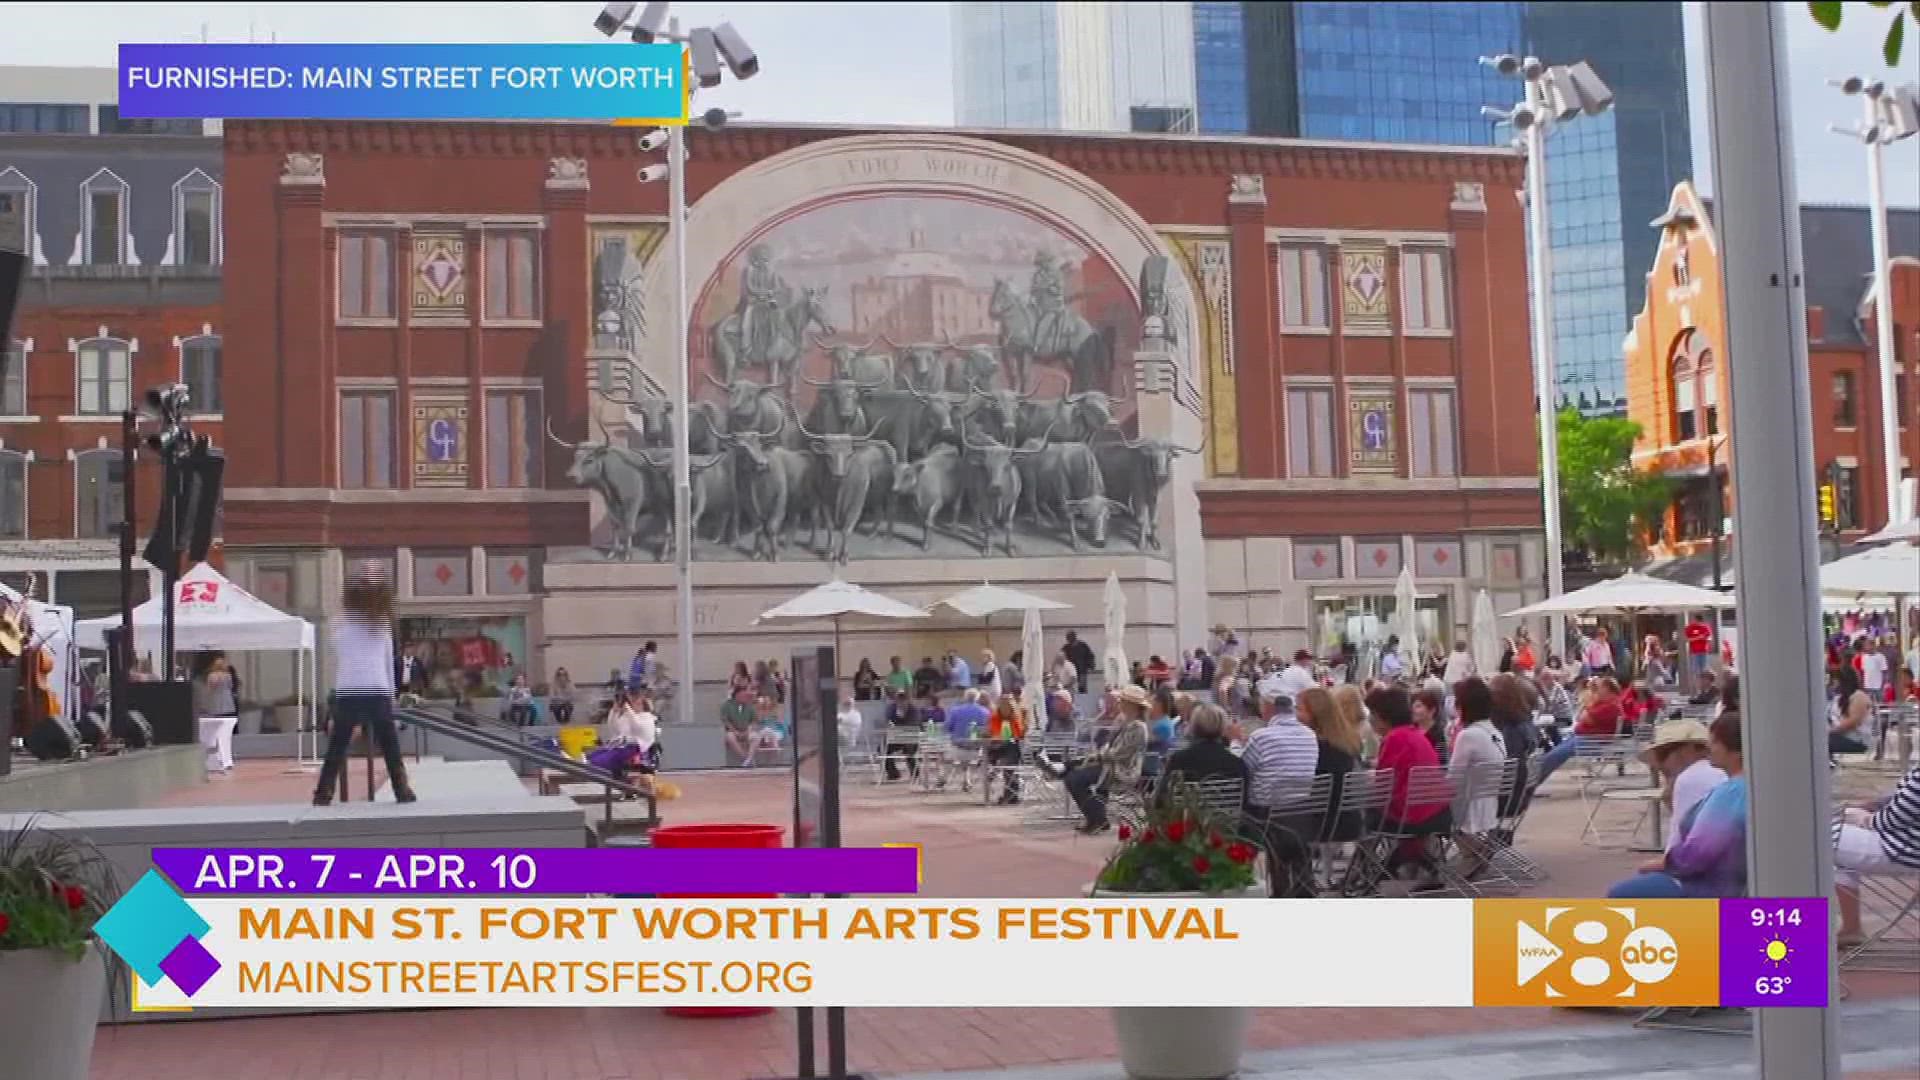 The Main Street Arts Festival is back in Fort Worth after a two-year hiatus featuring local artists, music, food and the new family-friendly ‘makers zone’.